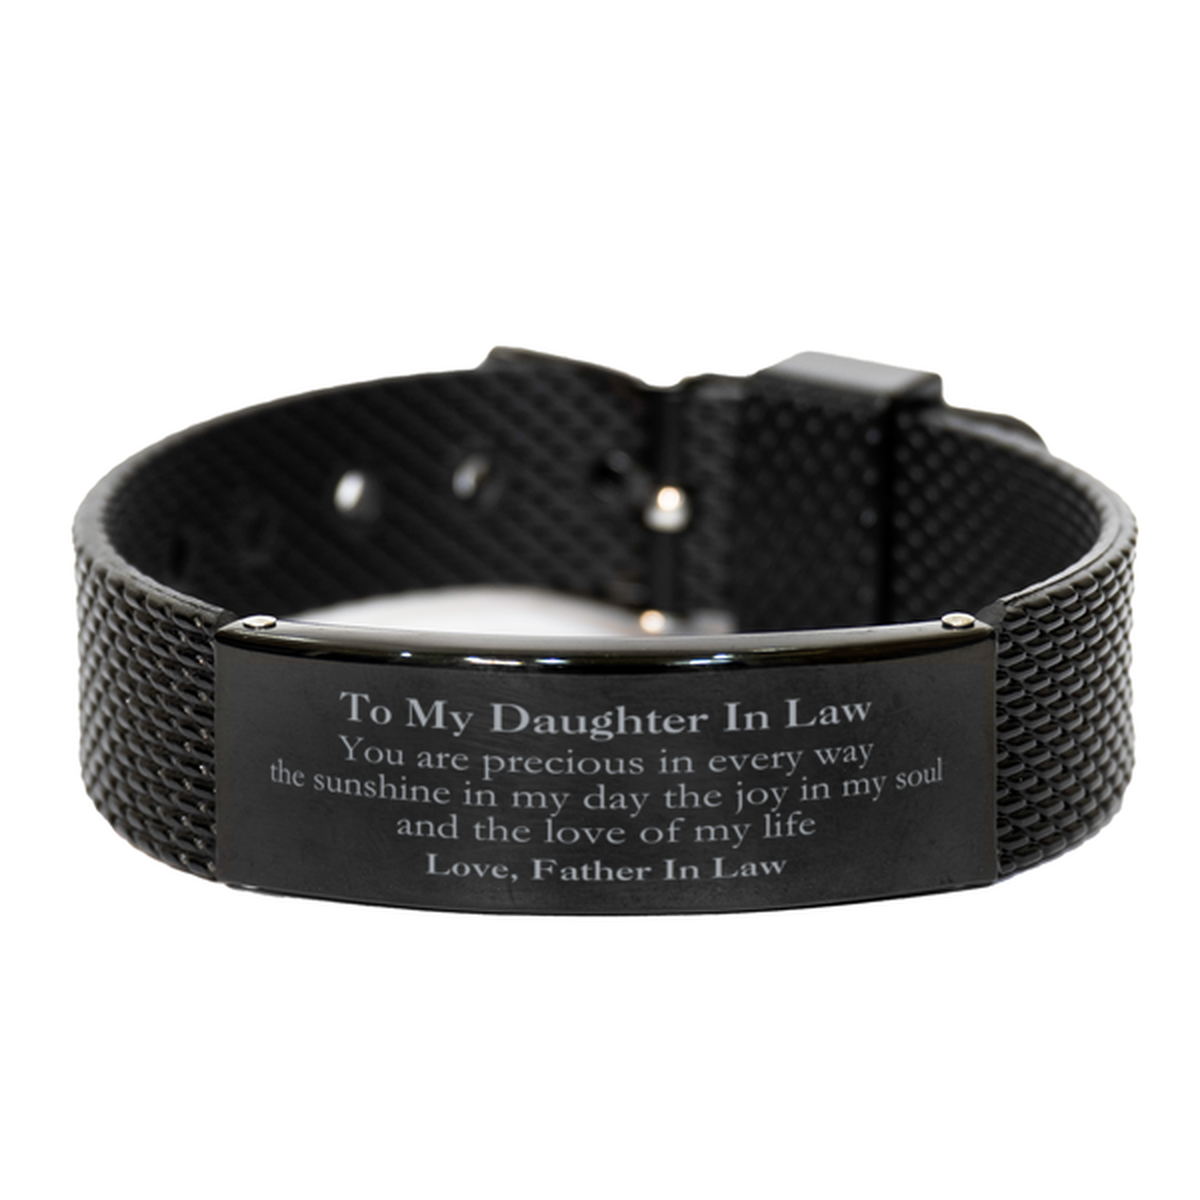 Graduation Gifts for Daughter In Law Black Shark Mesh Bracelet Present from Father In Law, Christmas Daughter In Law Birthday Gifts Daughter In Law You are precious in every way the sunshine in my day. Love, Father In Law